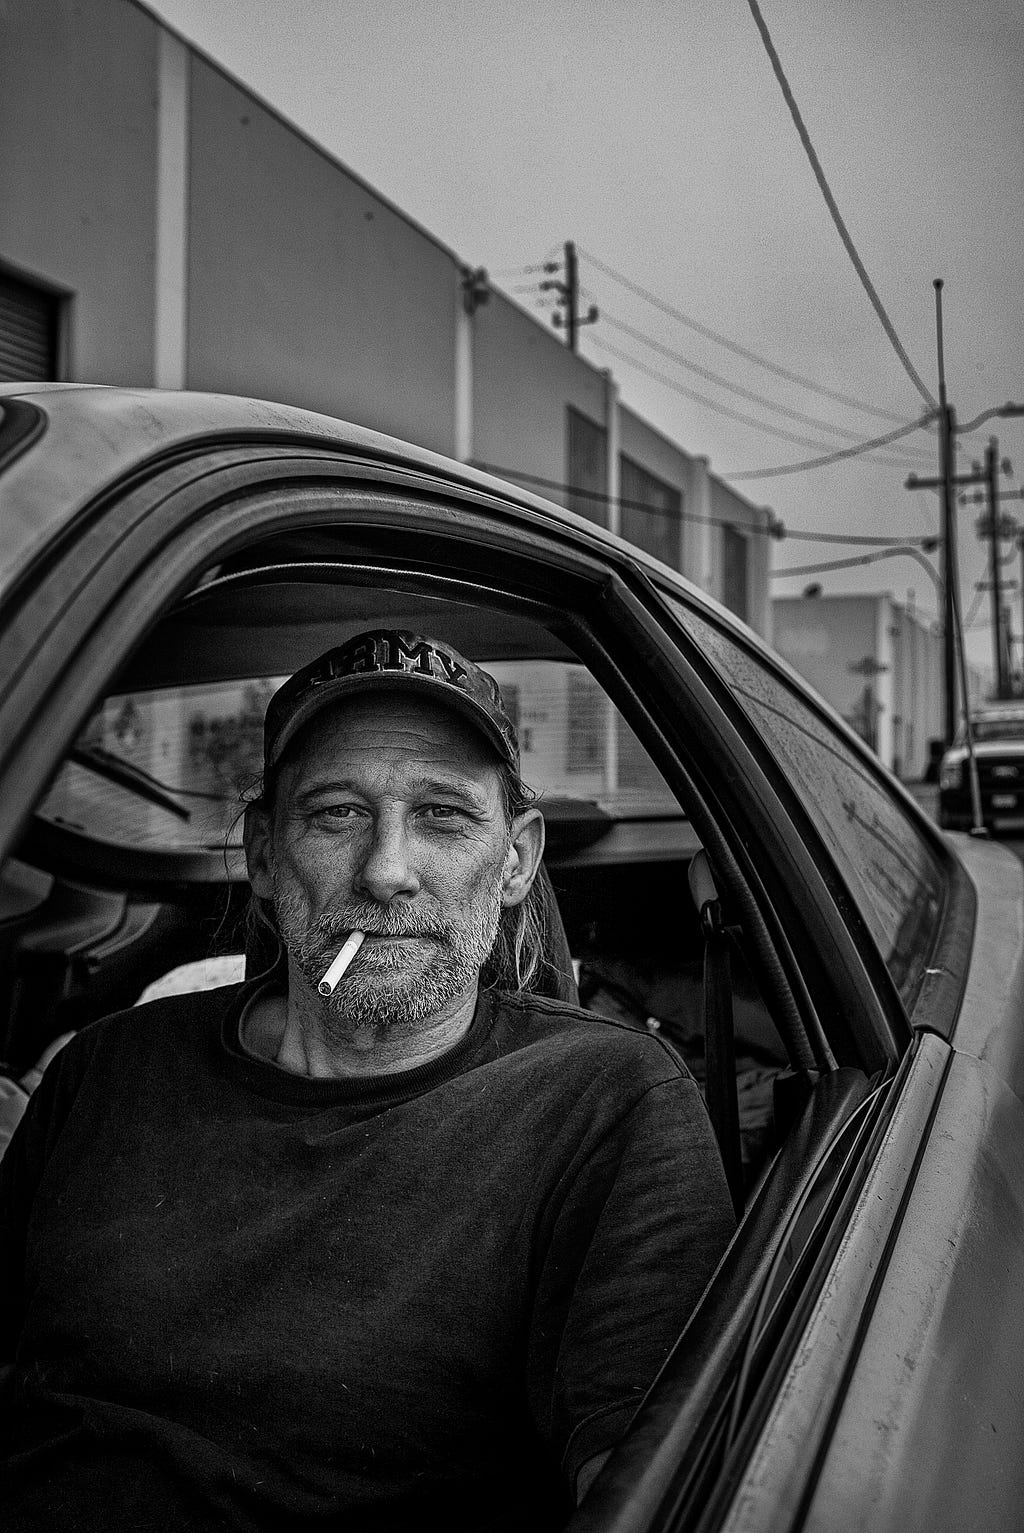 Rankin near Custer on the edge of the Bayview section of San Francisco. Car dweller Kurt Shuptrine, 55 and a vet parks his car here because he can see the water.